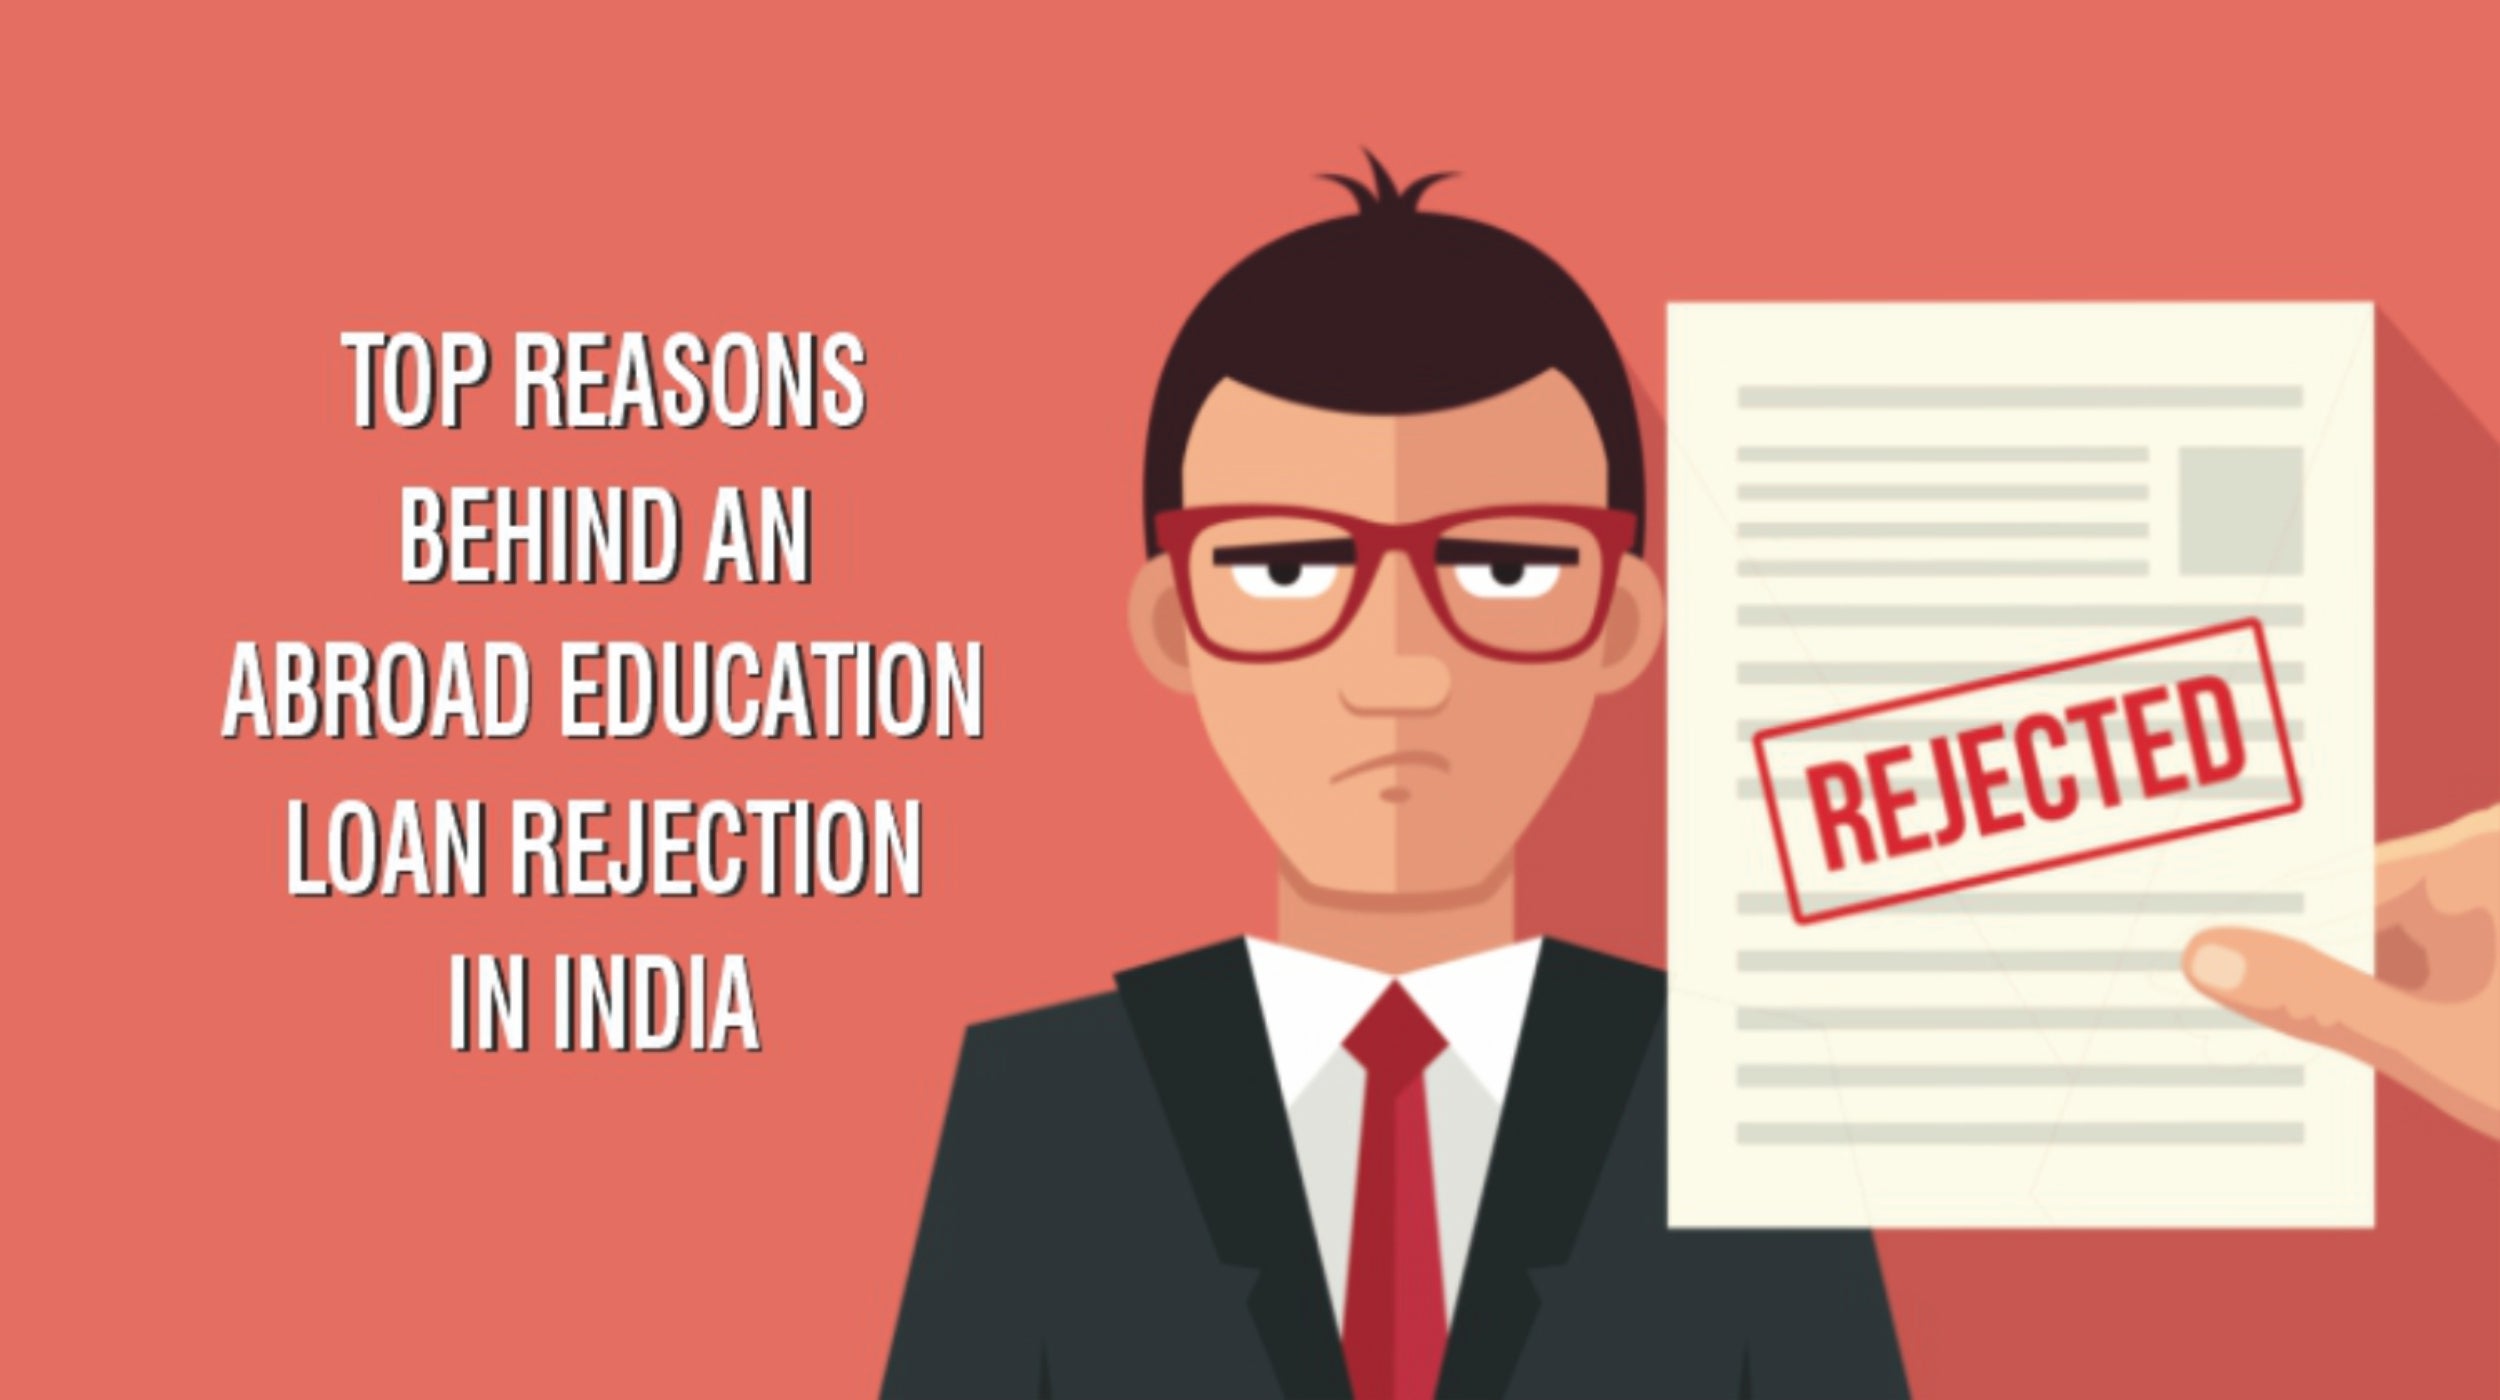 Top Reasons Behind An Abroad Education Loan Rejection in India